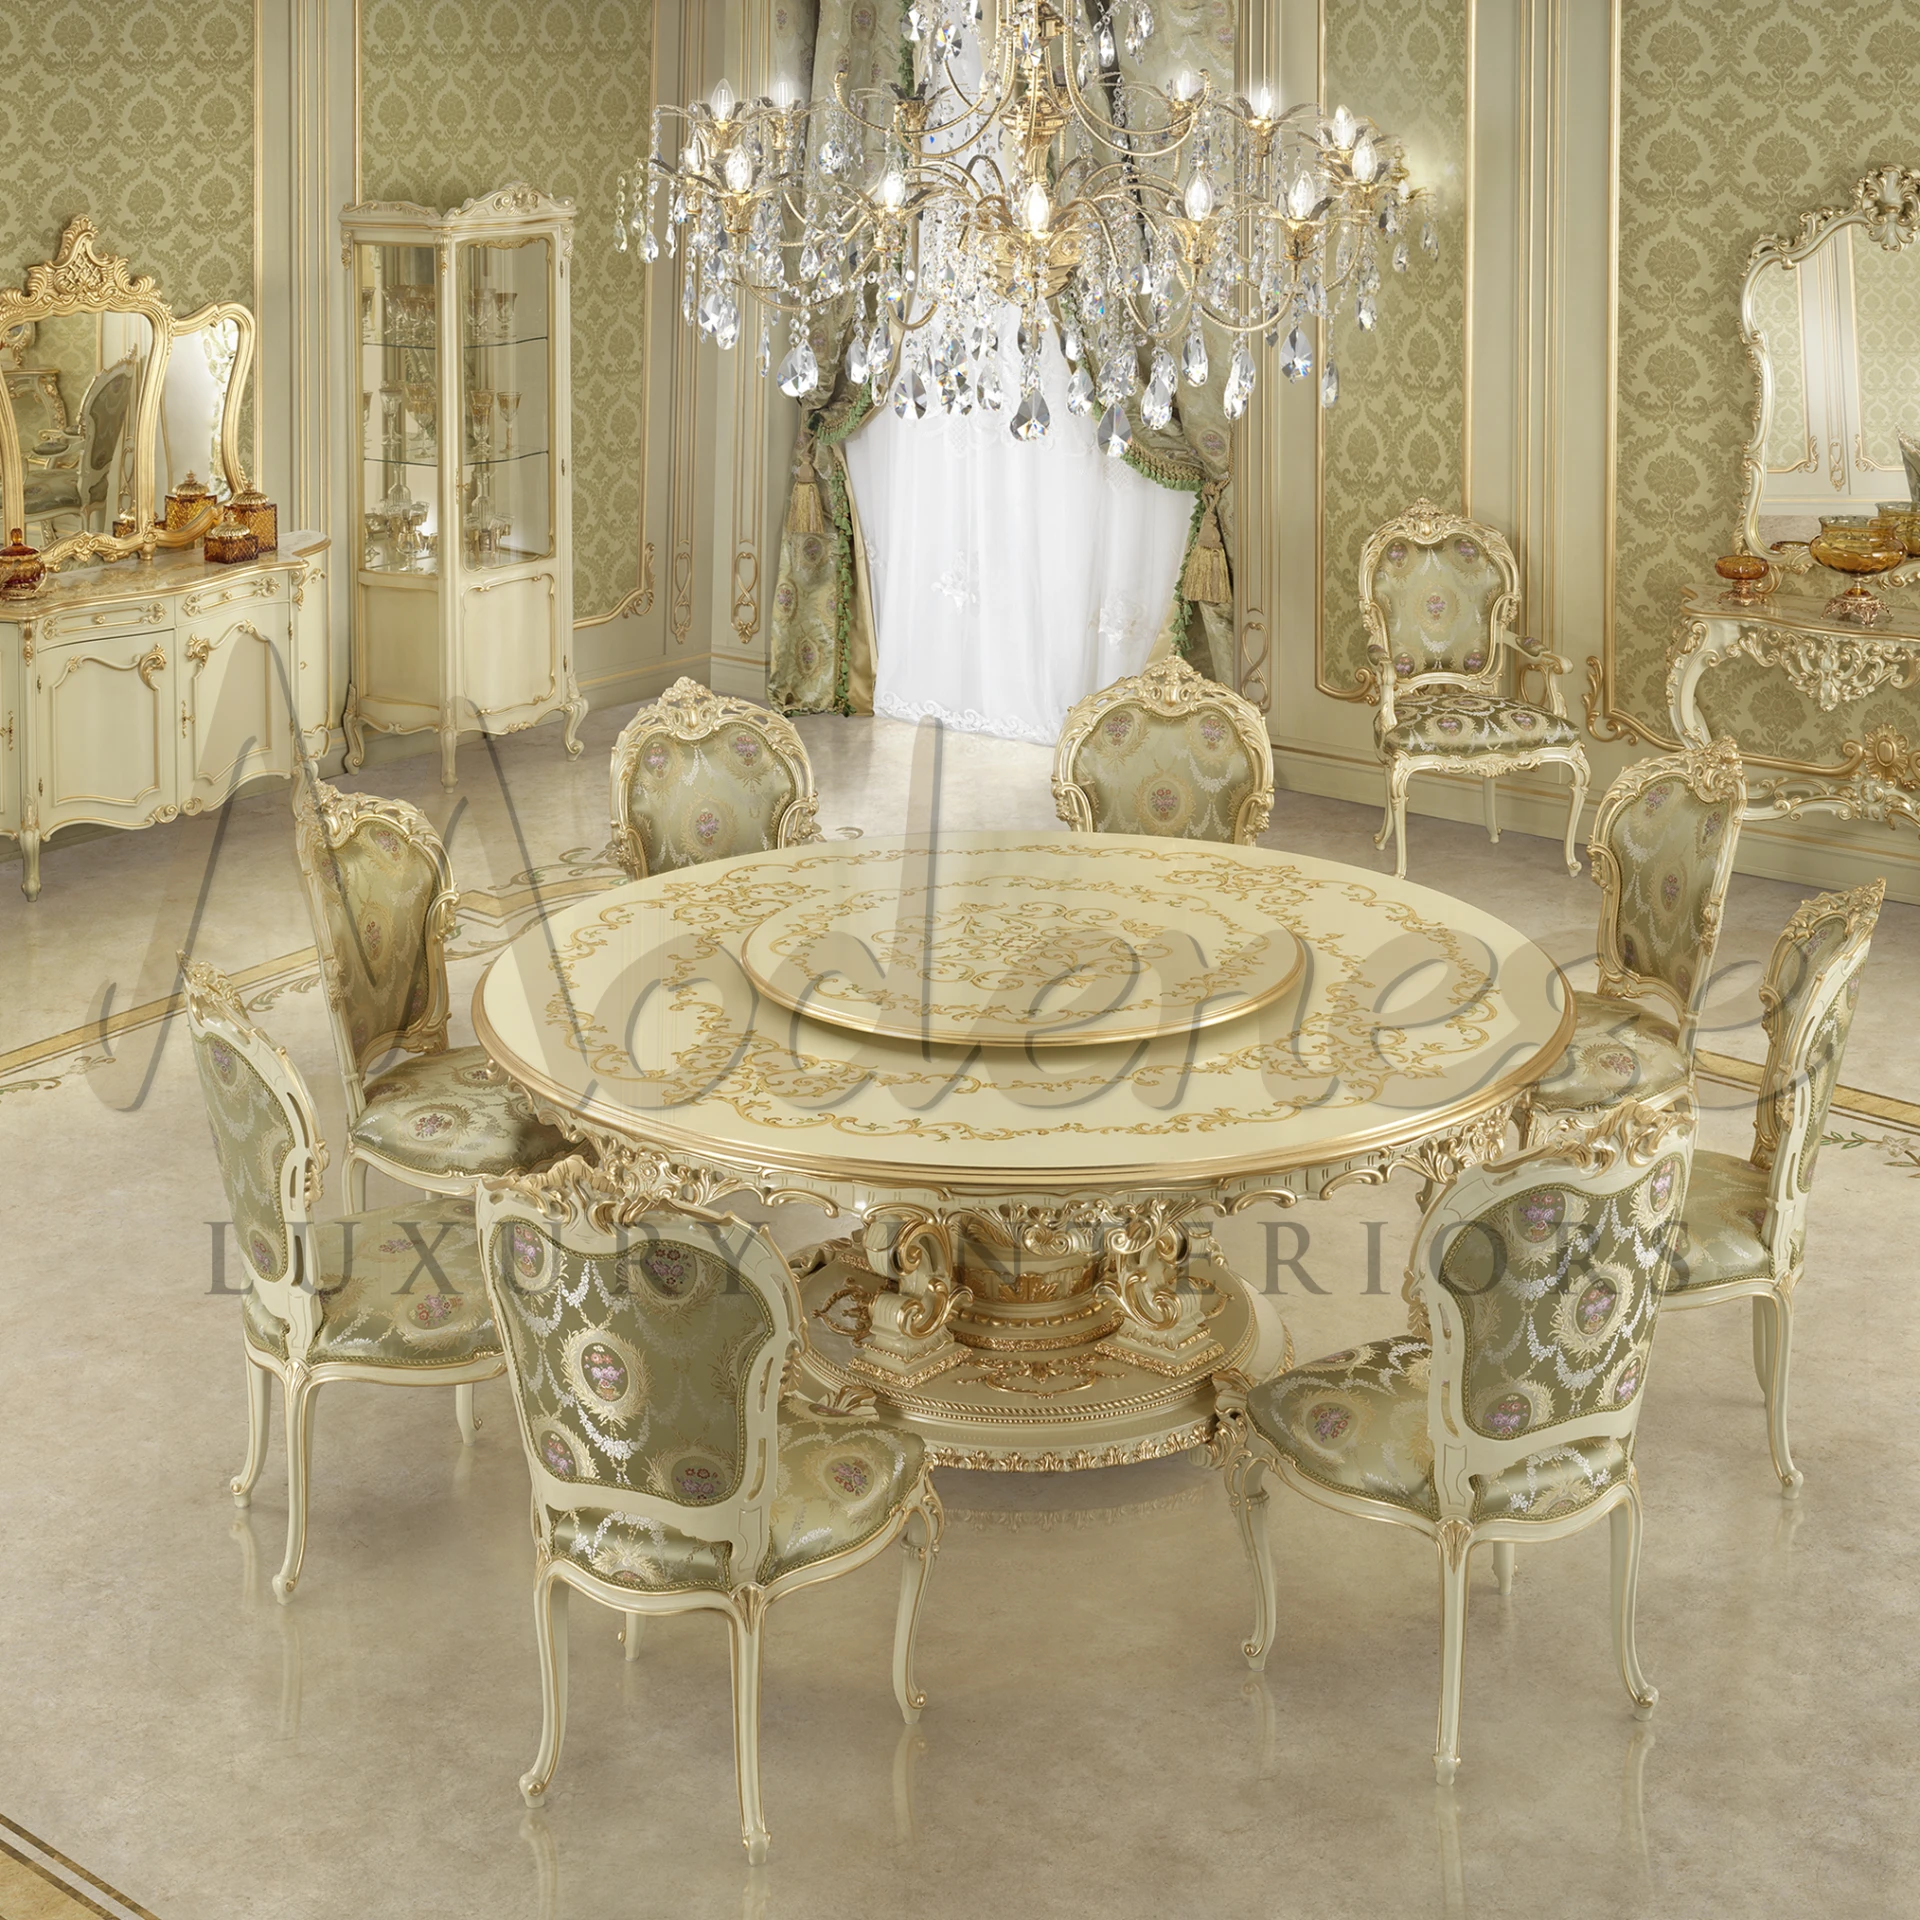 Classic living room furniture, including a vanity with a gilded mirror, dining set, and two glass cabinets.